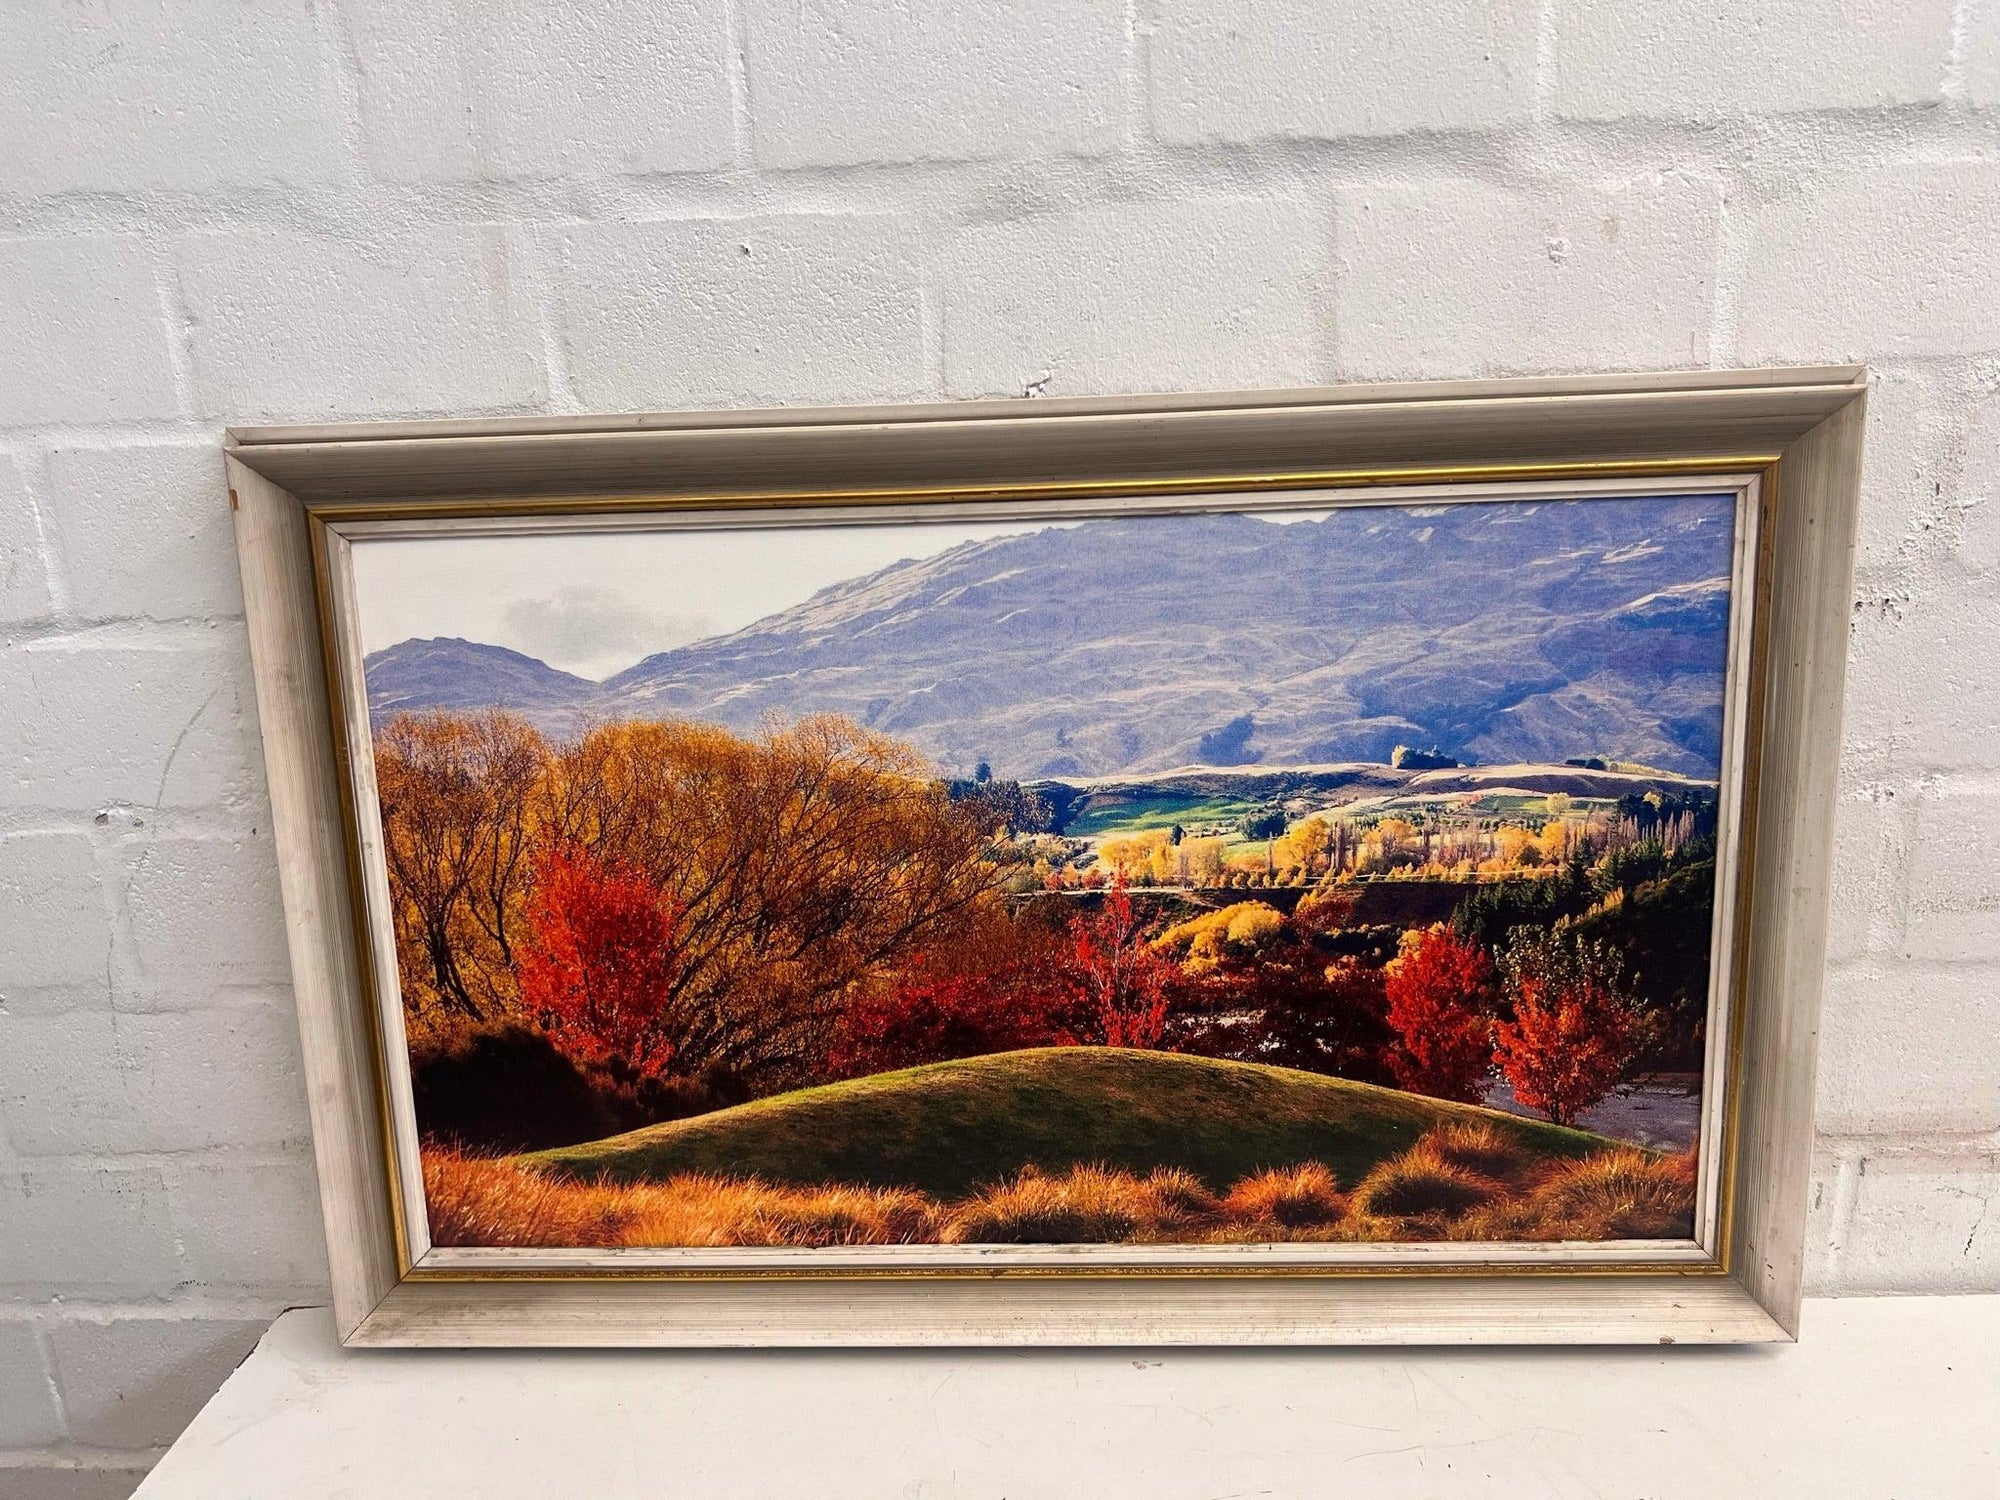 Hill View Framed Picture 98 x 63cm